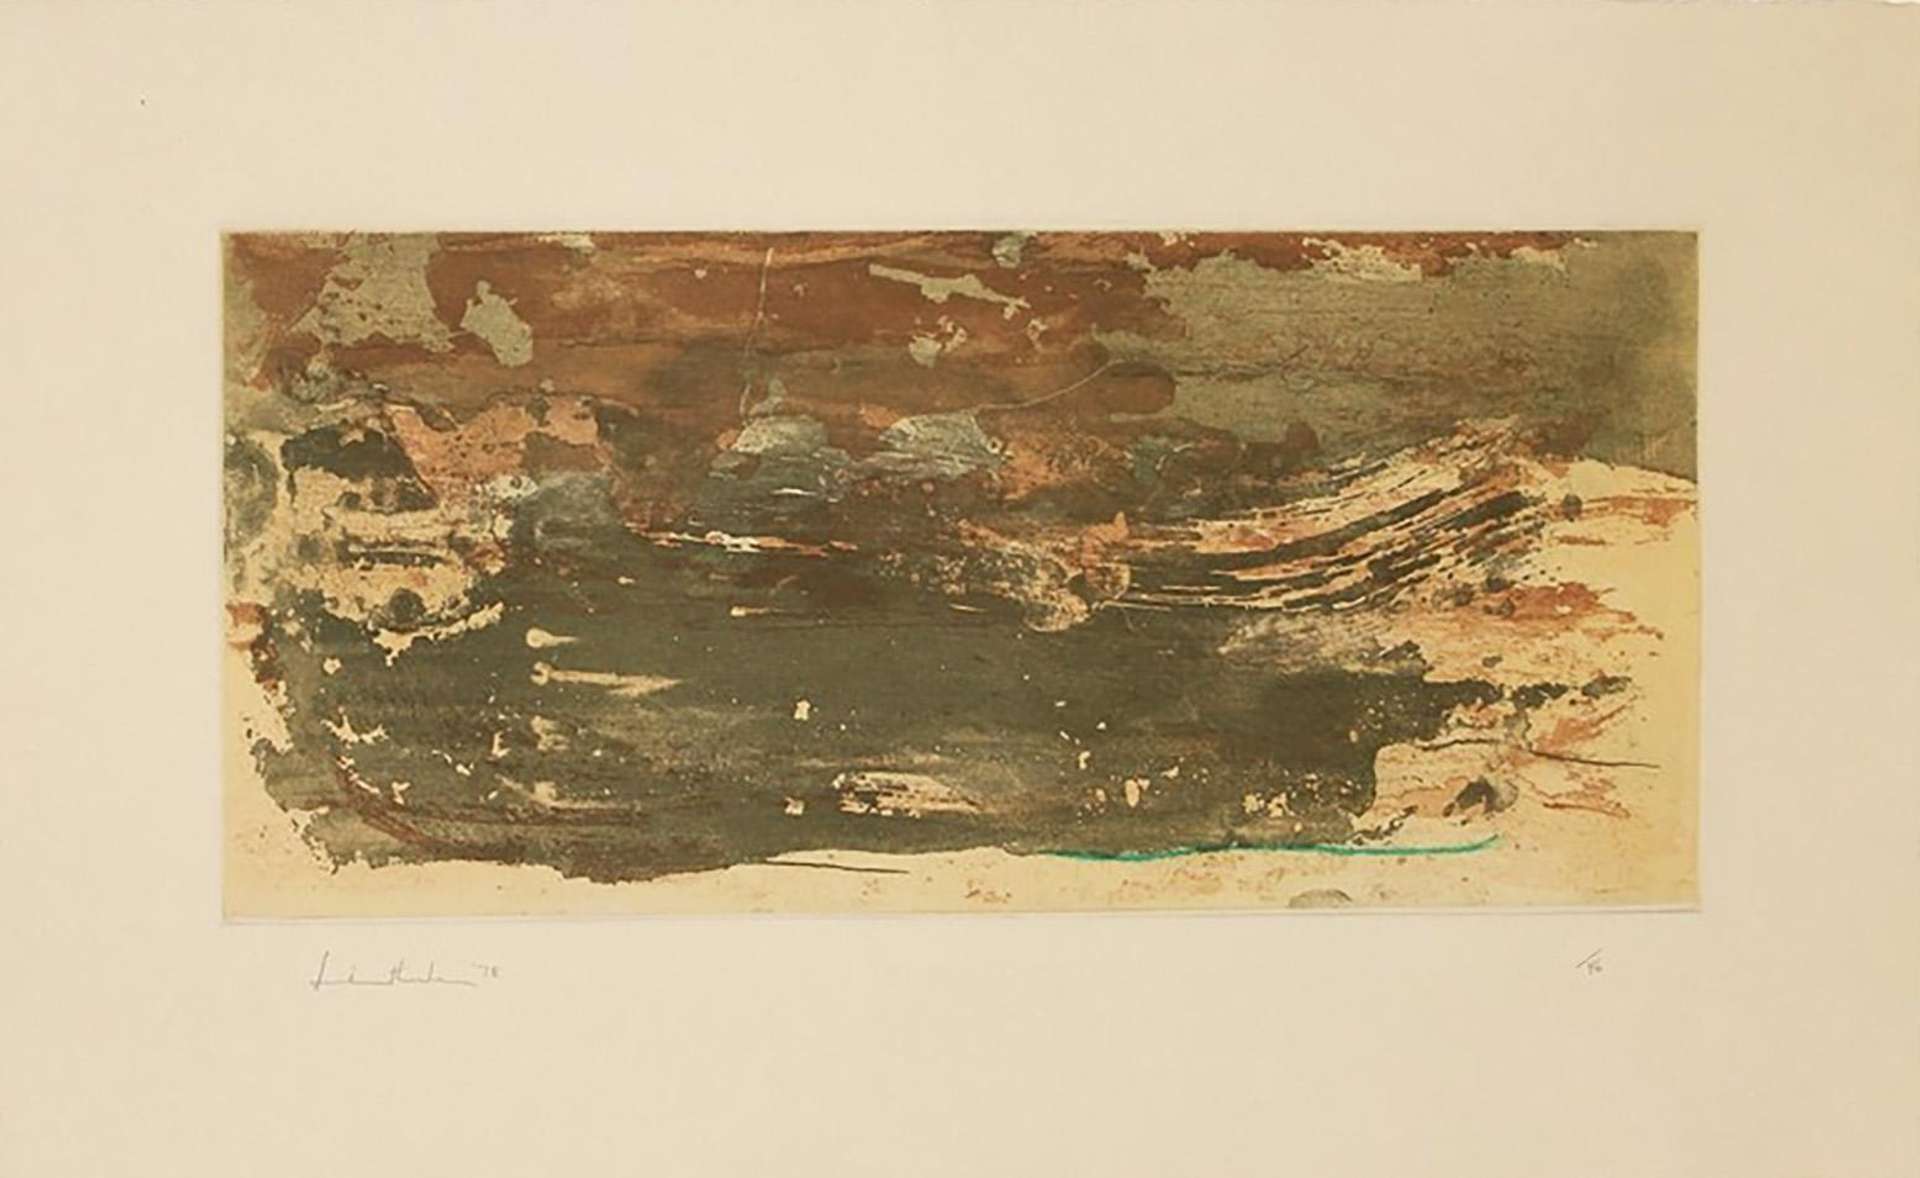 Helen Frankenthaler’s Earth Slice. An abstract expressionist intaglio print of a landscape of earth tones.Helen Frankenthaler’s Earth Slice. An abstract expressionist intaglio print of a landscape of earth tones.